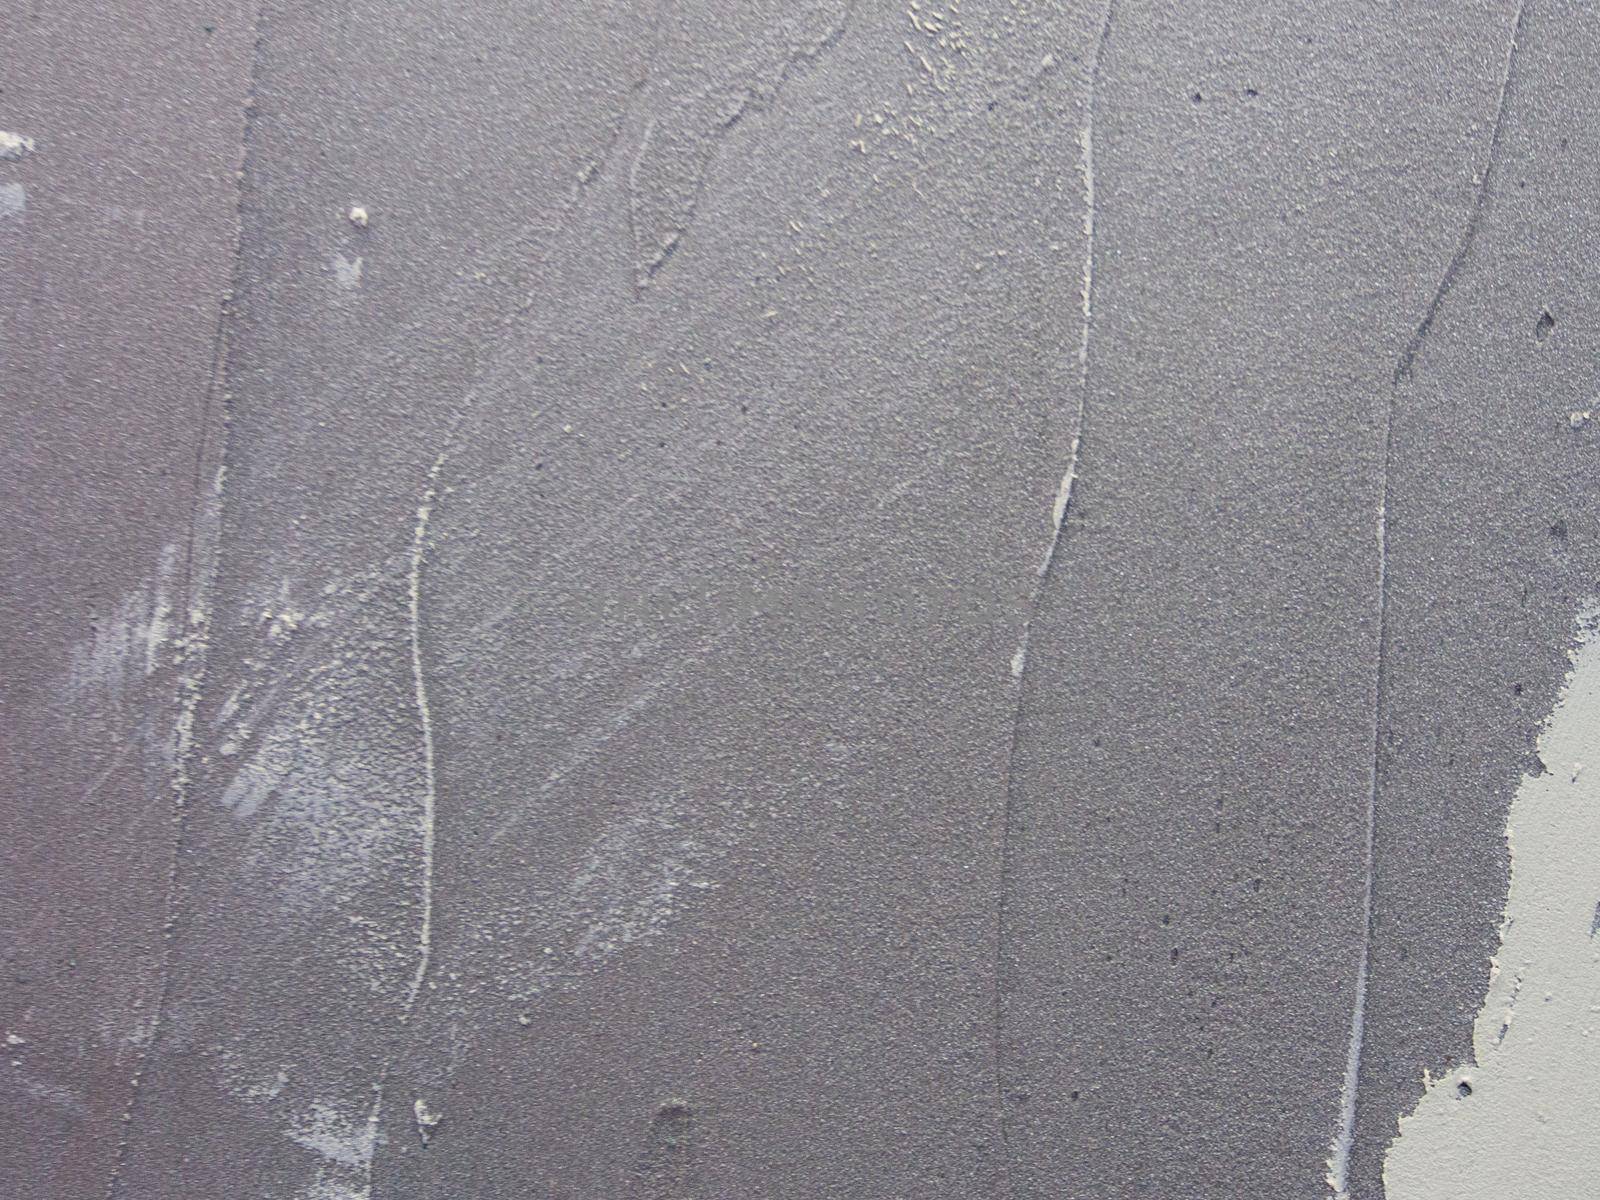 applied putty on a special type of car. car putty during auto repair